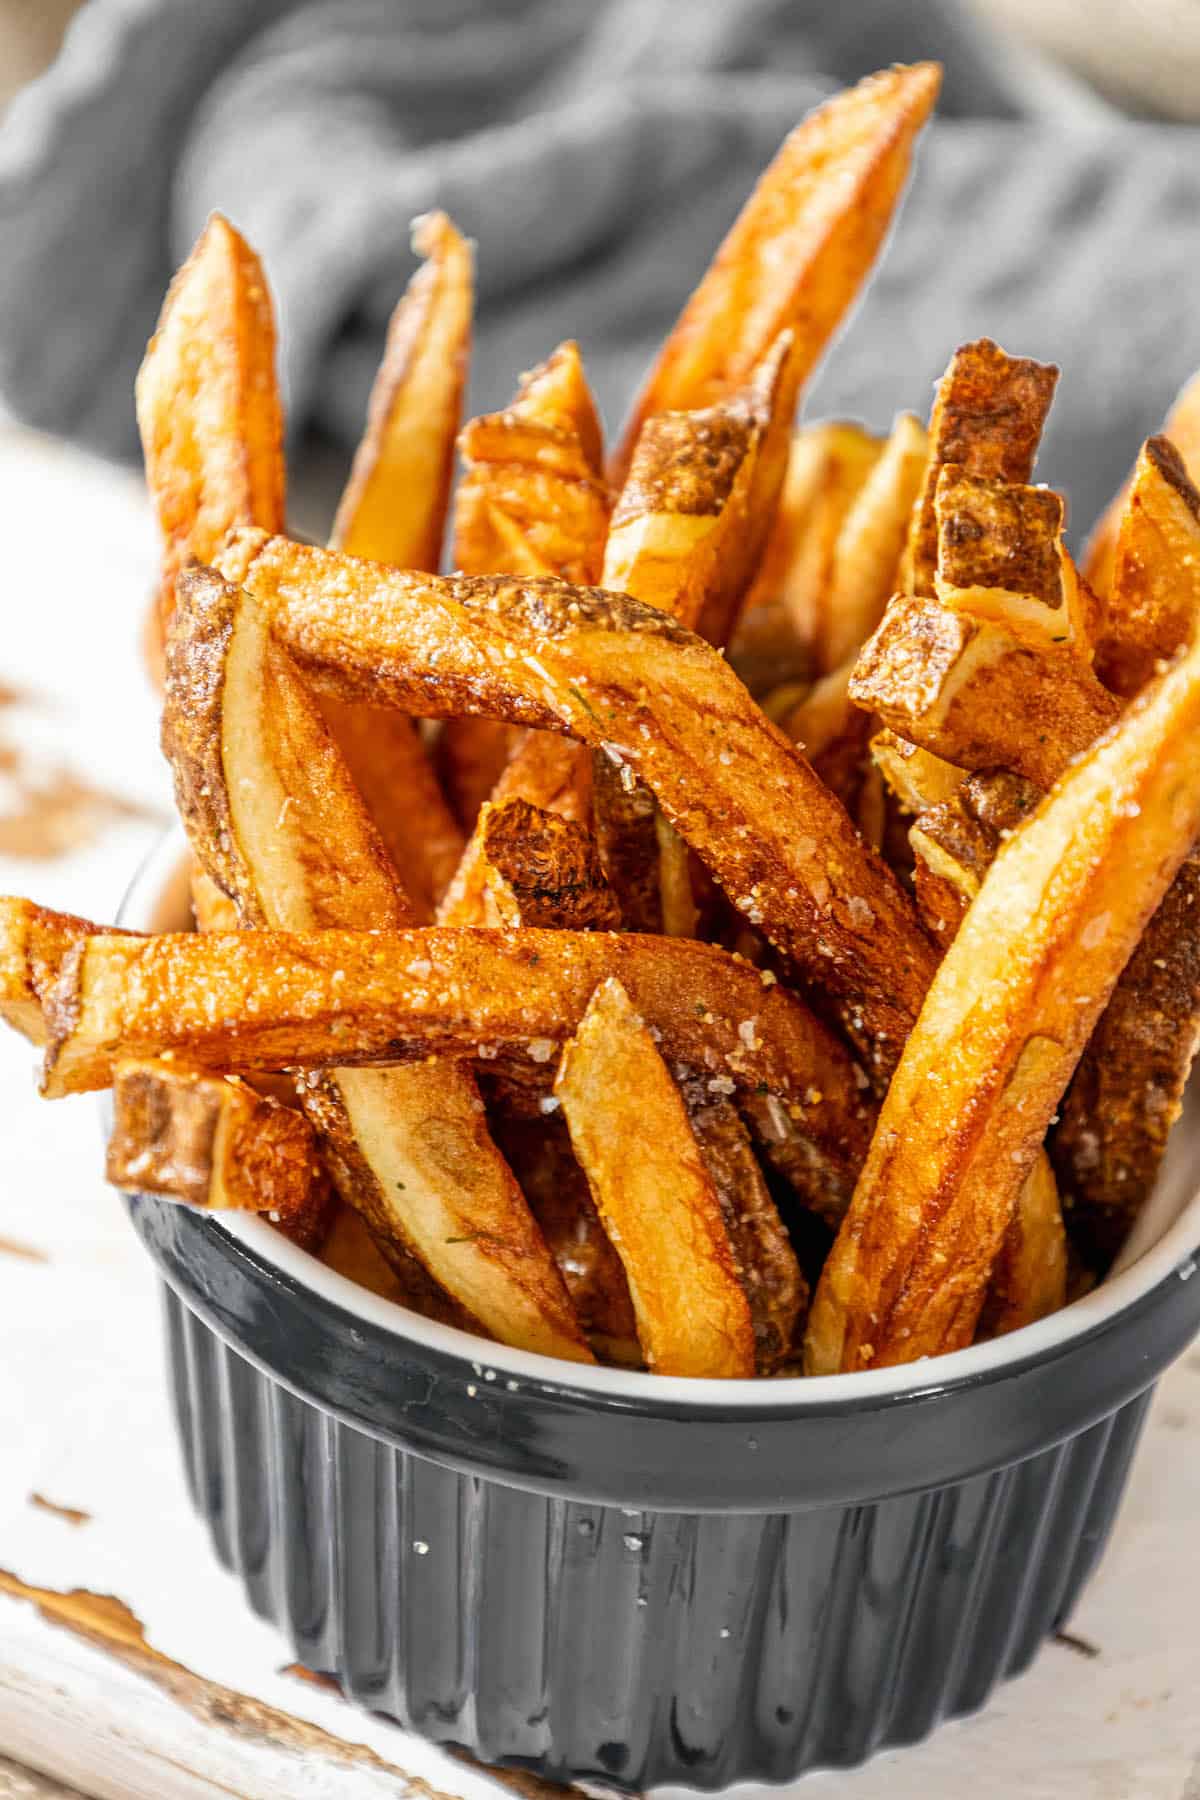 Crispy air fried sweet potato fries in a bowl on a wooden table.